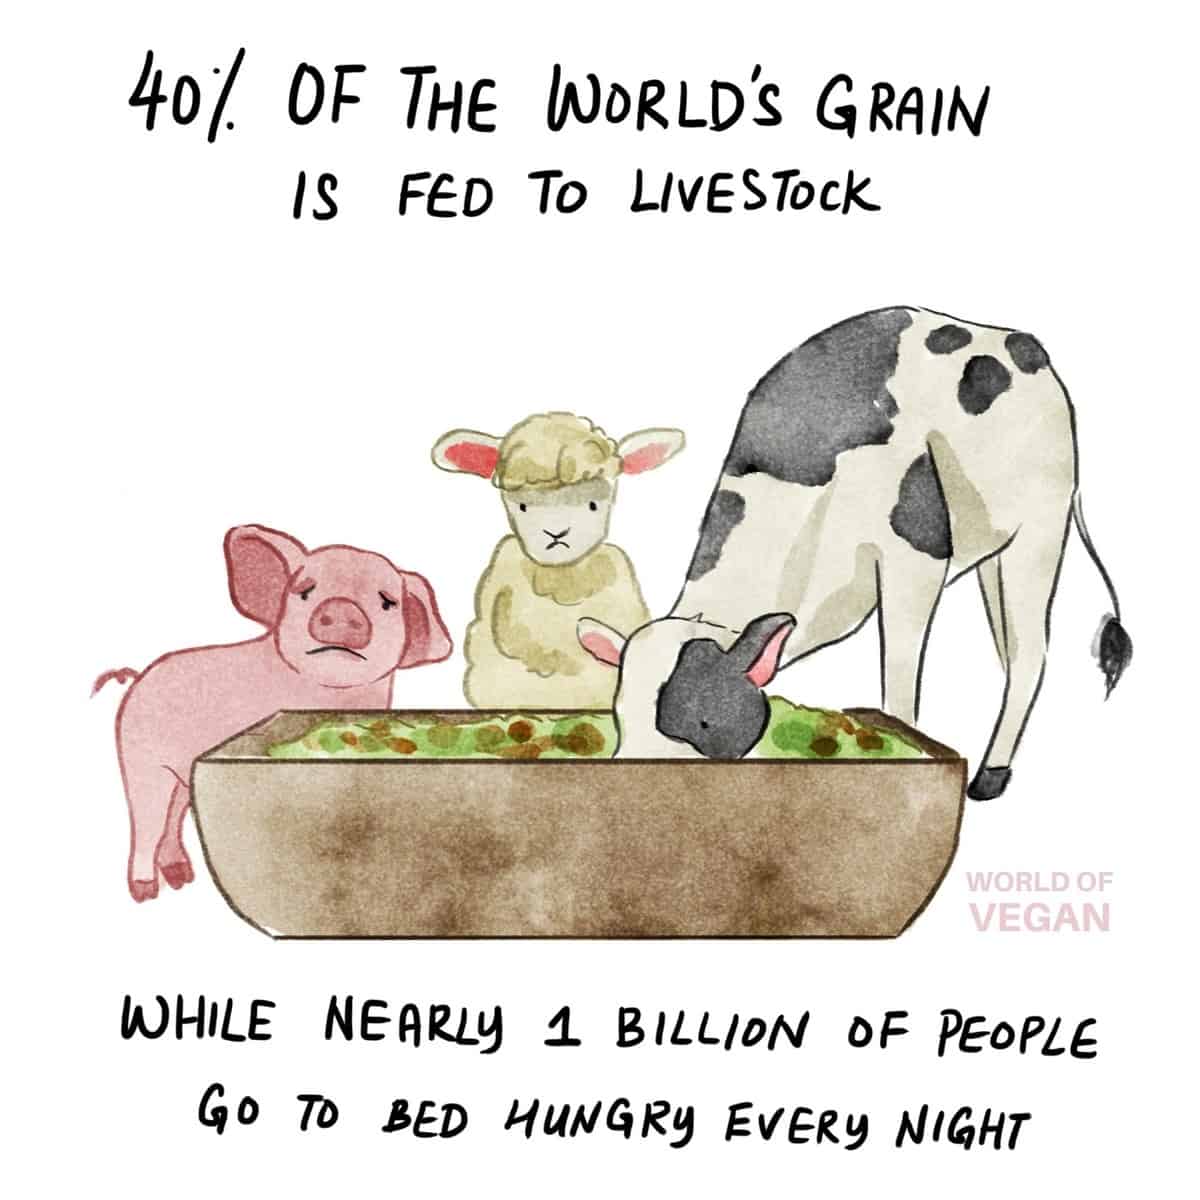 Illustration of a cow, pig, and lamb eating grain for livestock while human beings suffer from hunger. 